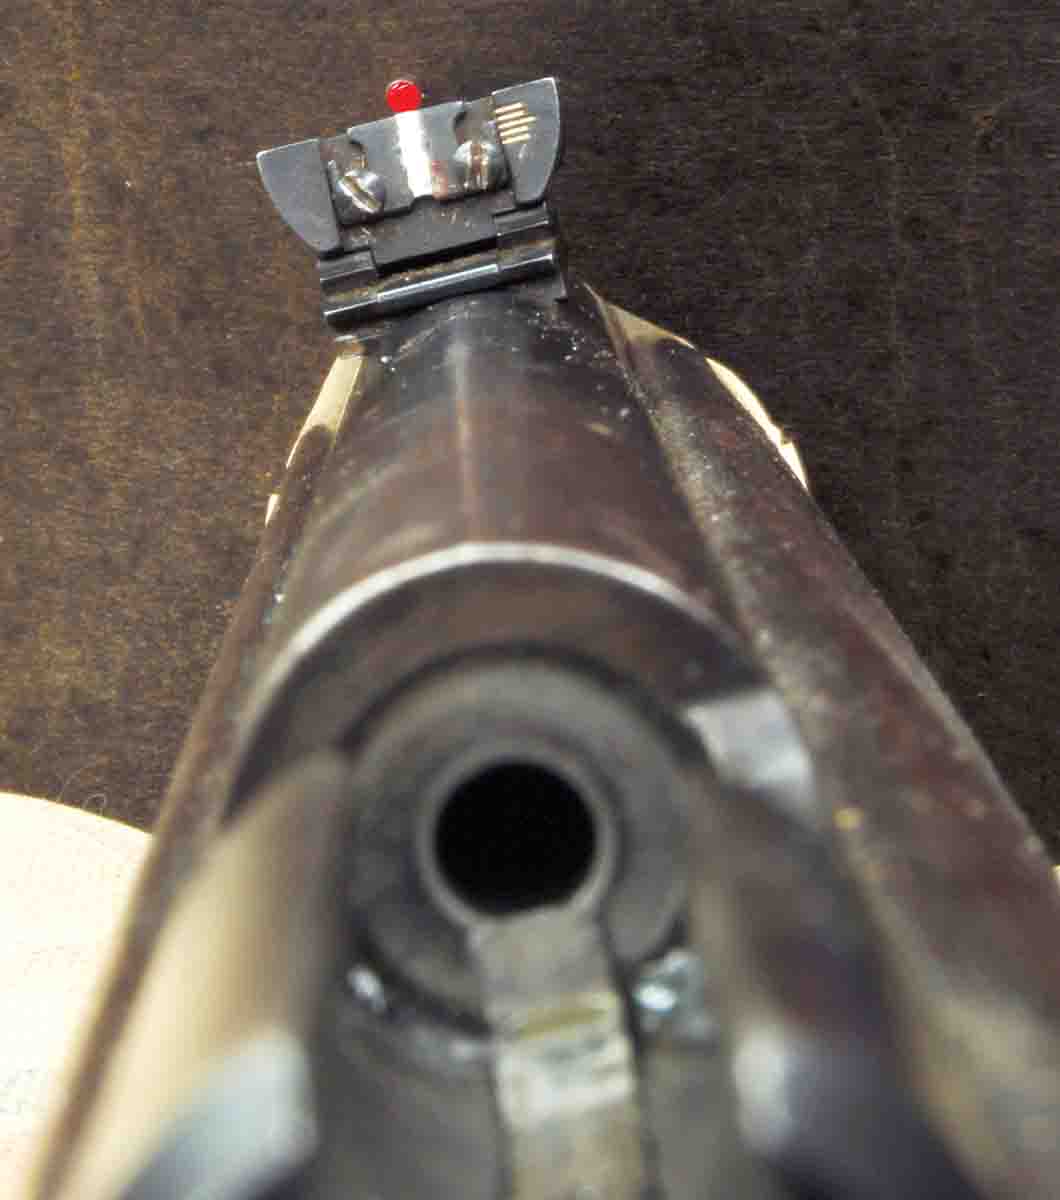 Sight picture on black background of the Fire Sight and Lyman rear.